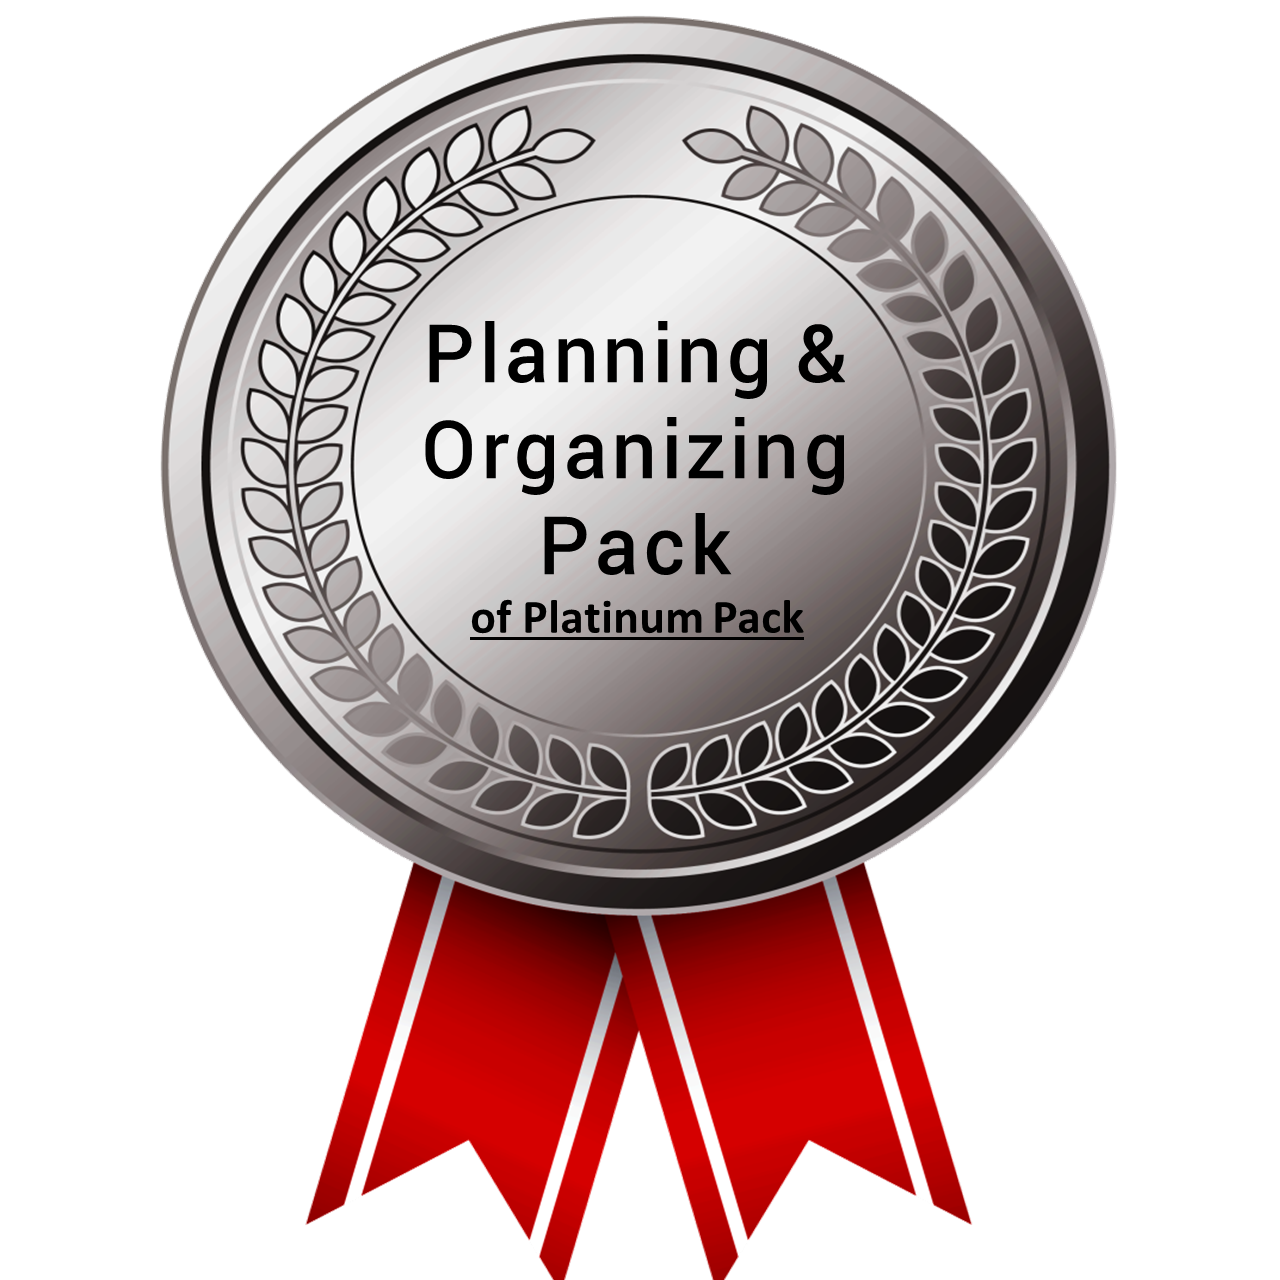 Planning & Organizing pack Pack - Platinum Pack - Ready made soft skills training ppt